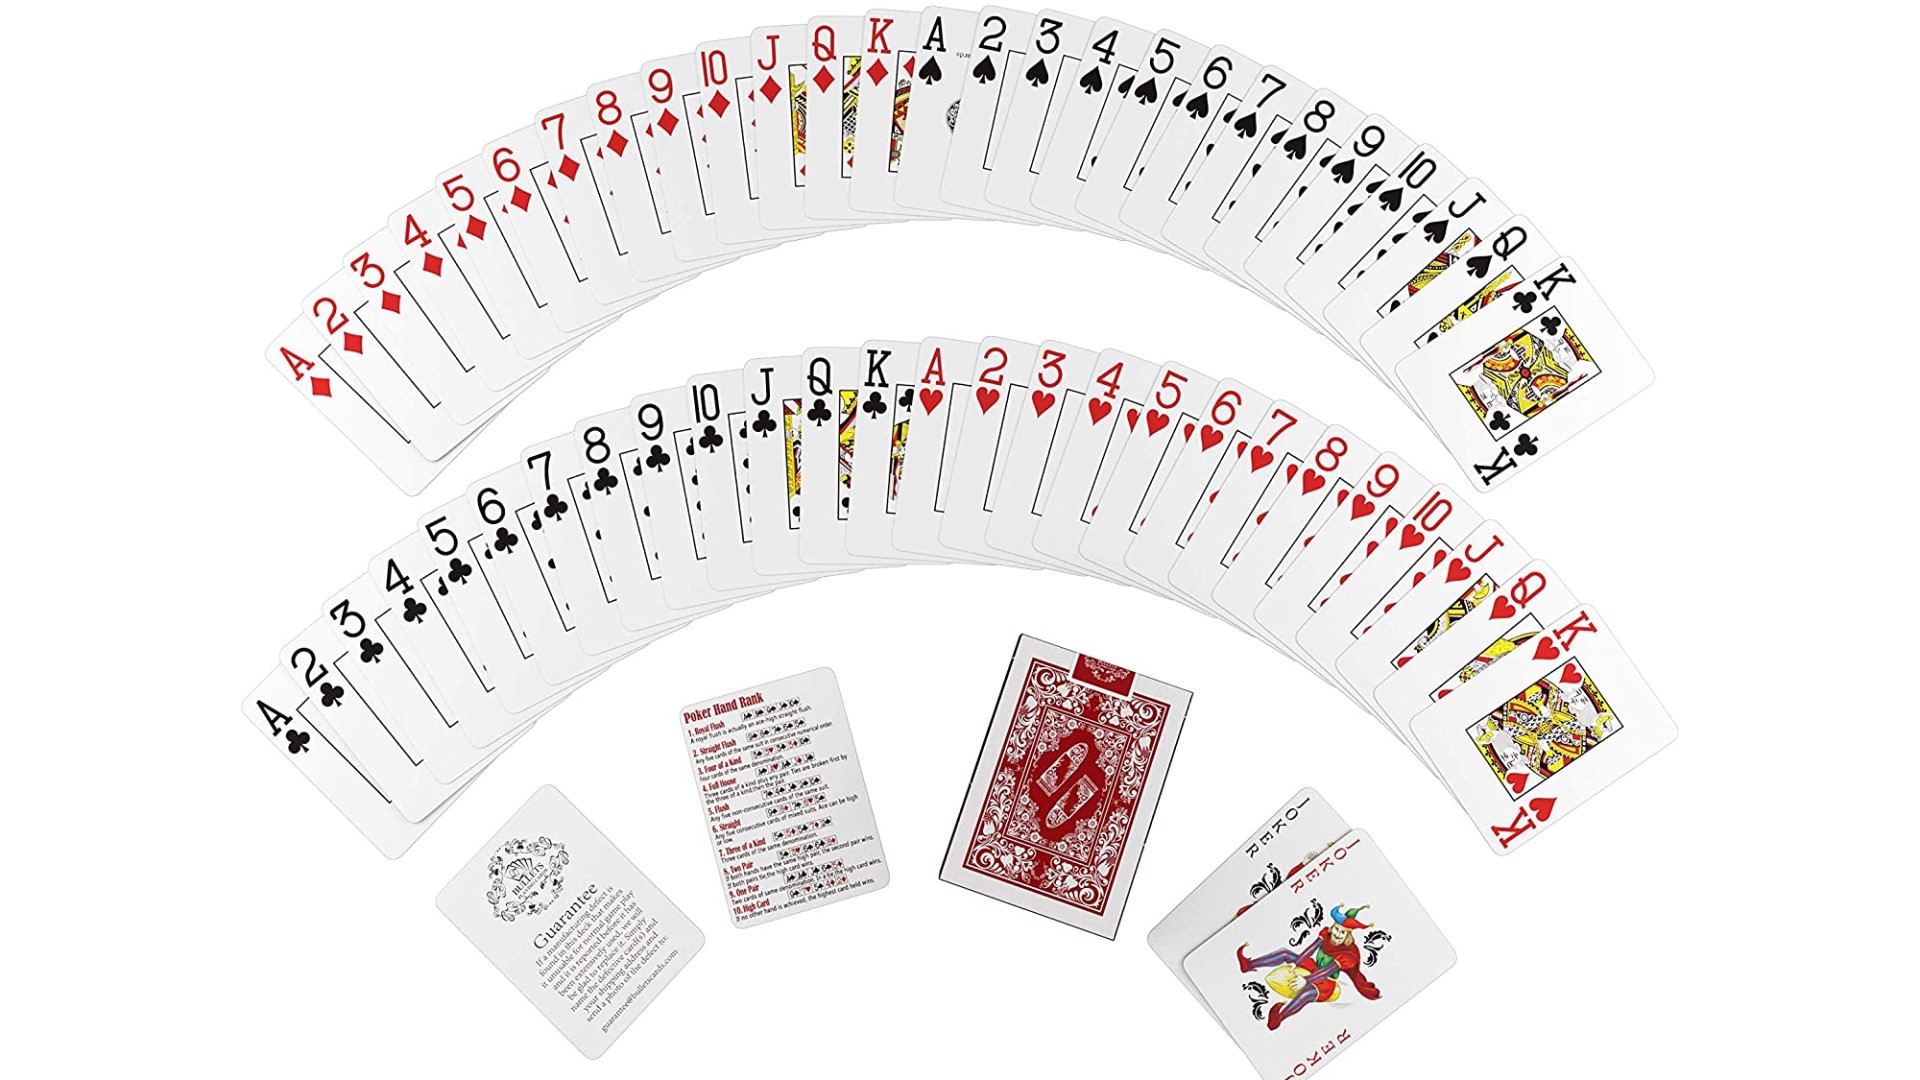 21 Easy Card Games for All Ages - Solitaired